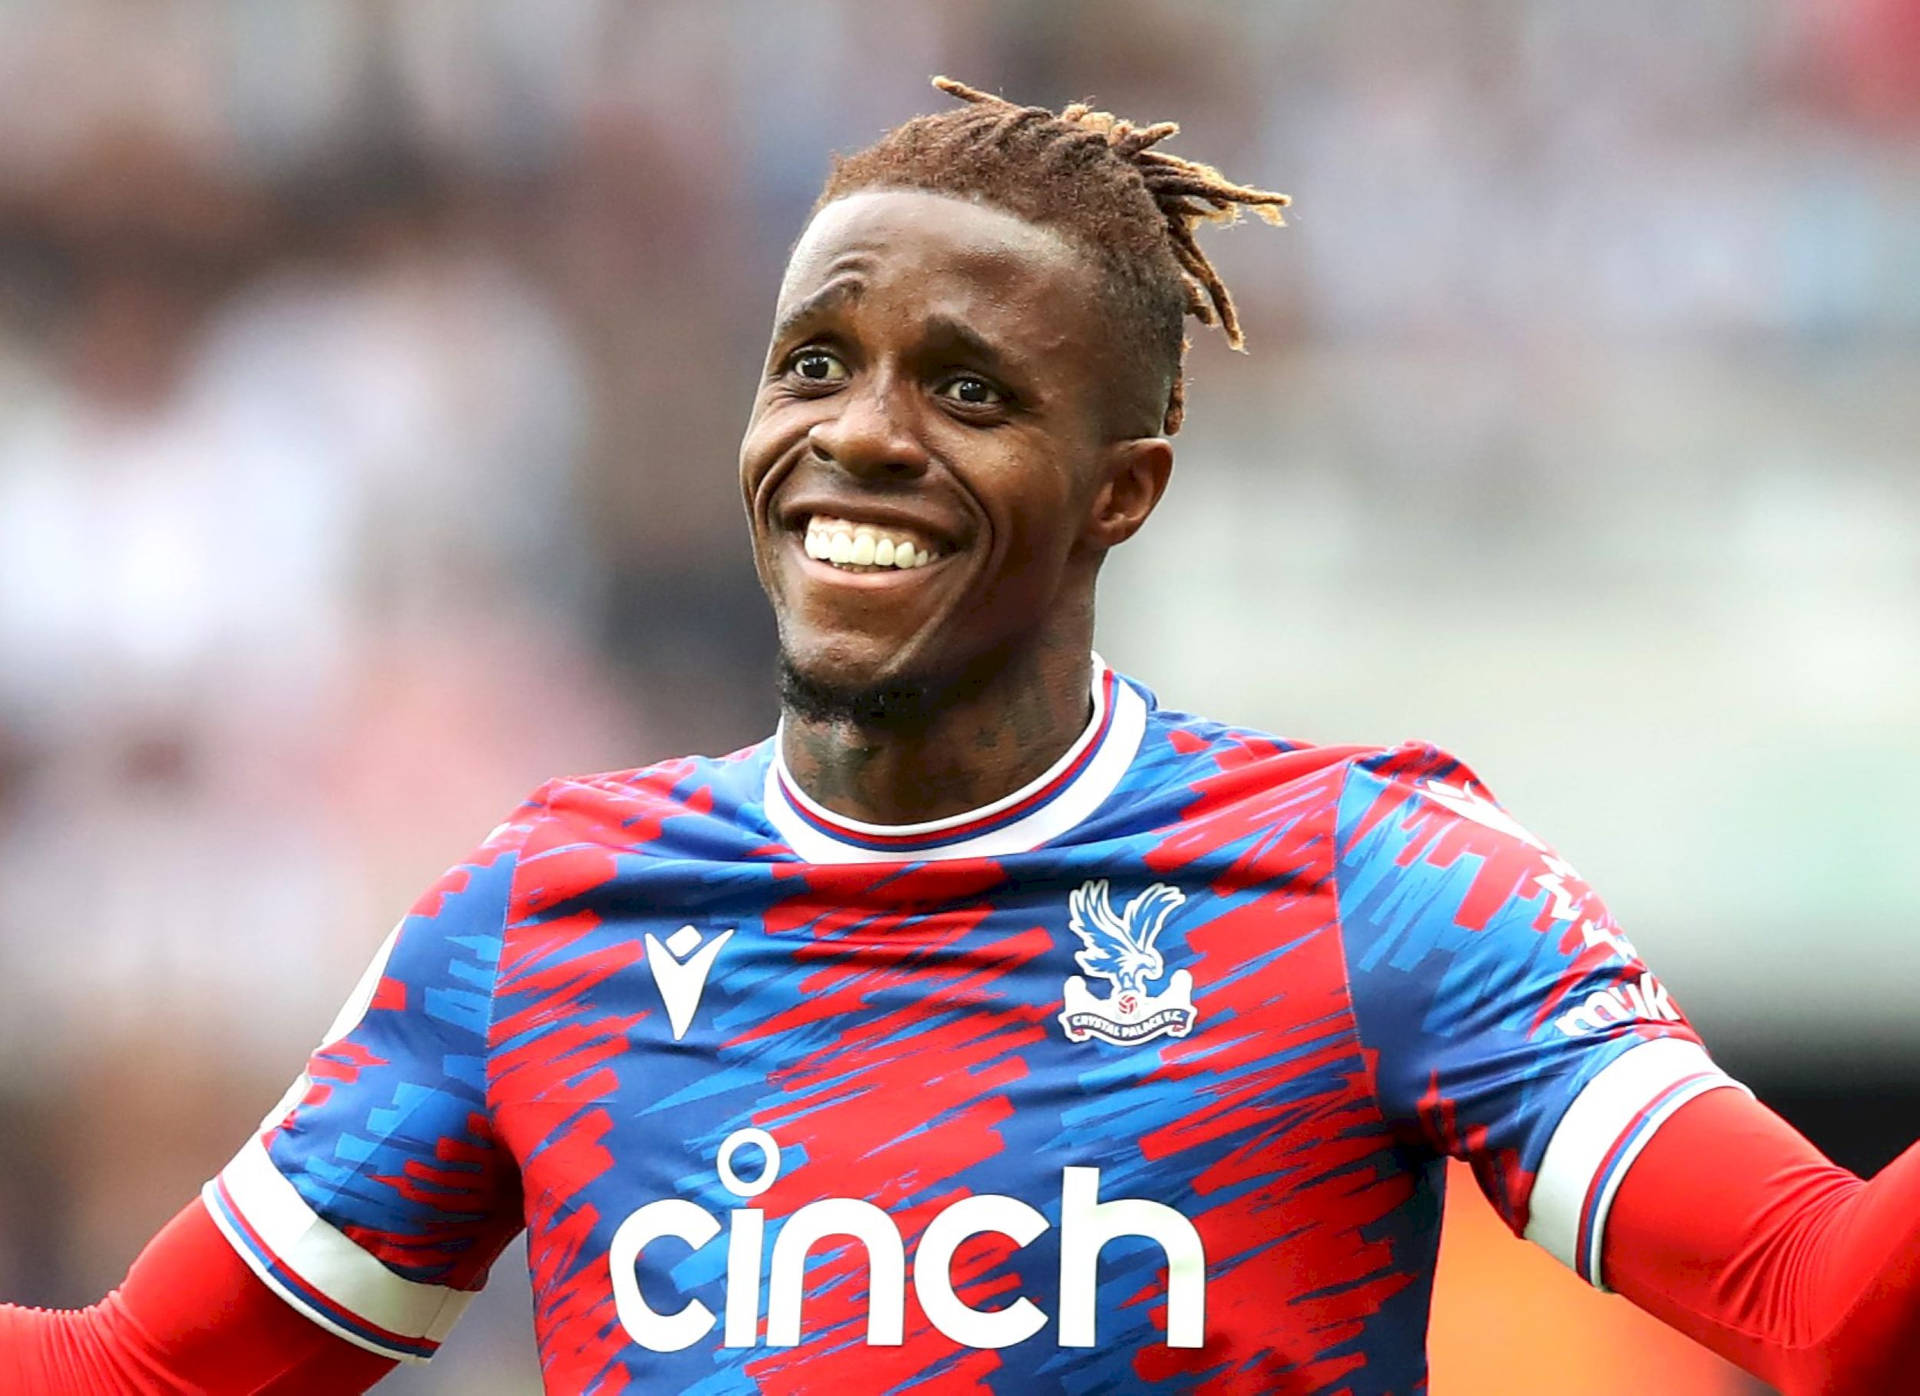 Wilfriedzaha Med Stort Leende. (note: This Sentence Doesn't Specifically Mention Computer Or Mobile Wallpaper, So A More Fitting Translation Might Be 